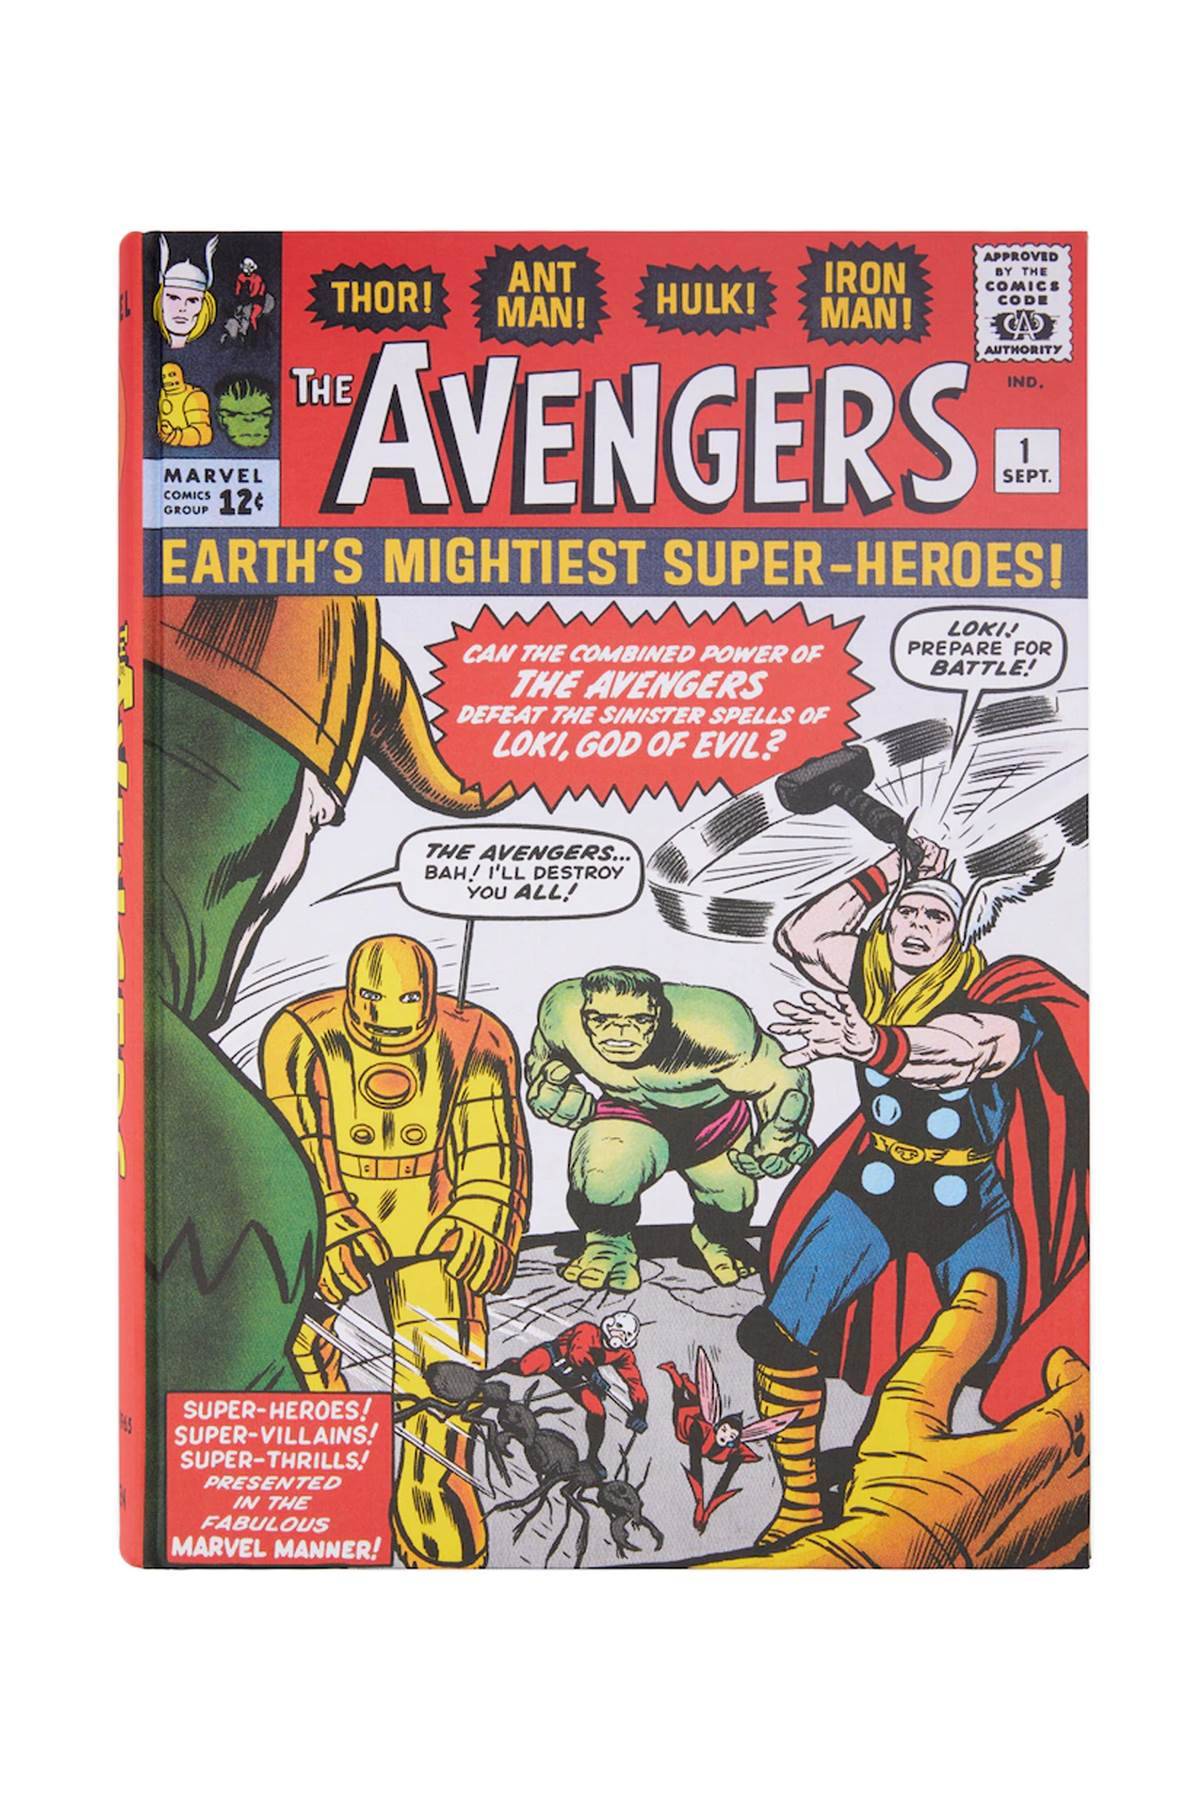 NEW MAGS marvel comics library. avengers. vol. 1. 1963-1965